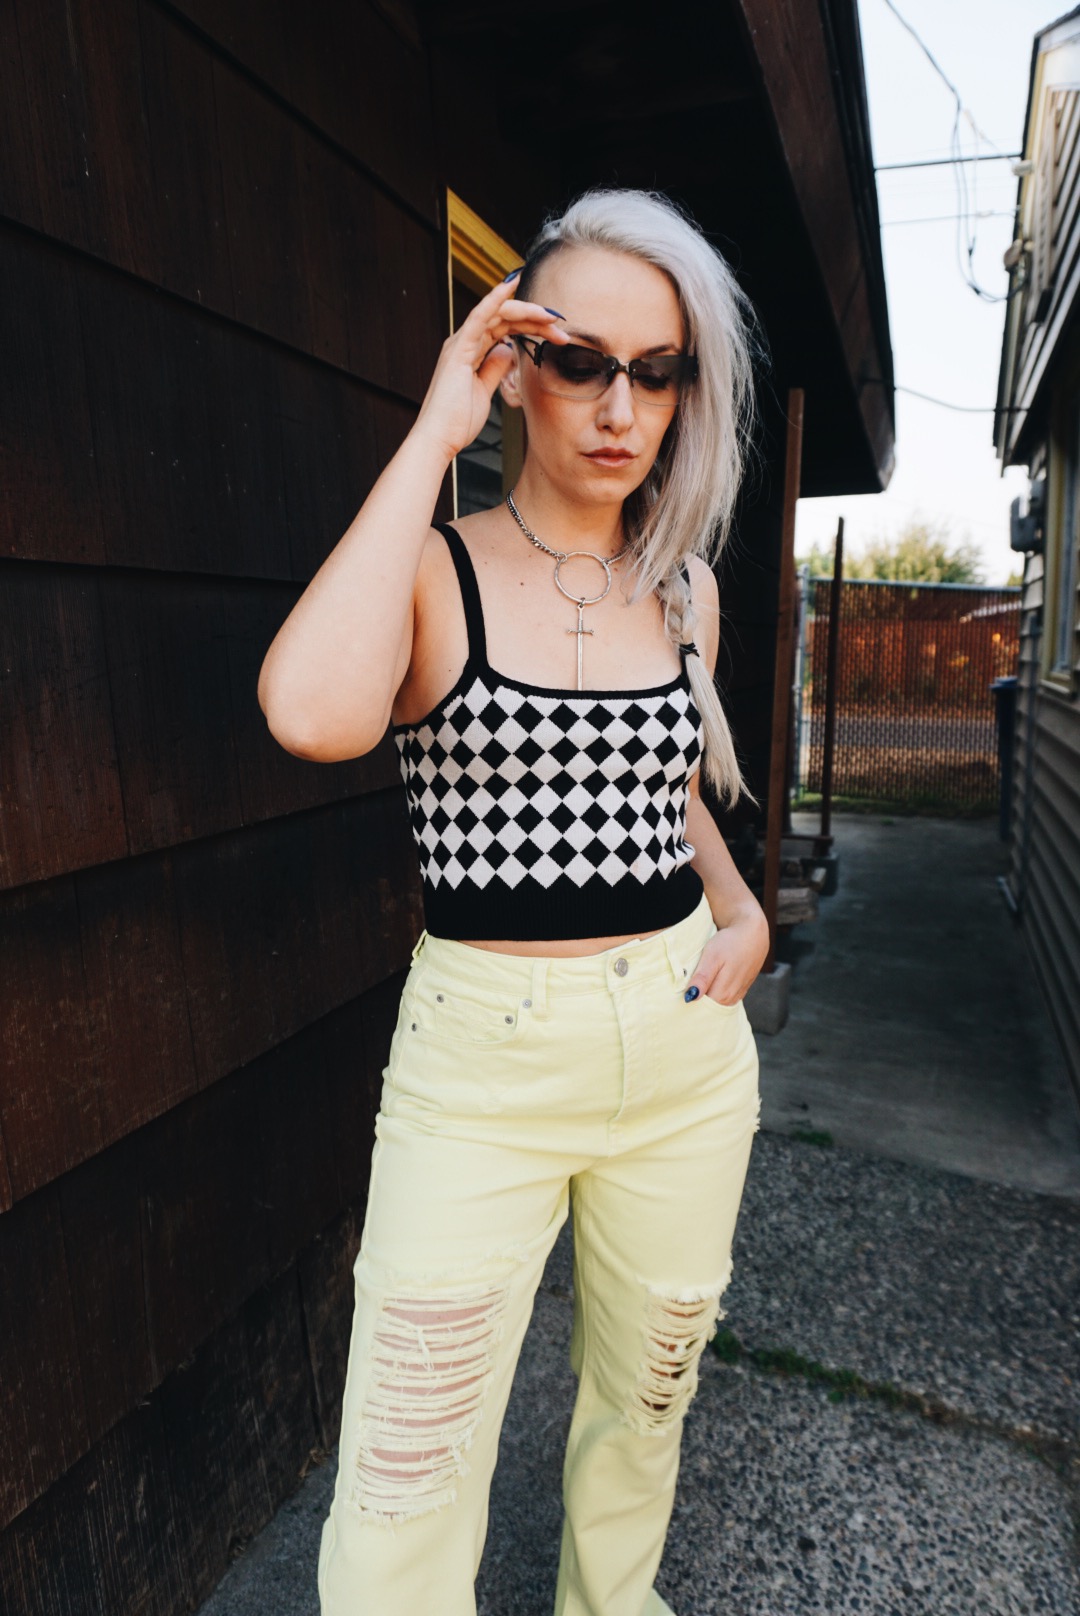 A woman wearing a black and white checkered tank top and neon yellow jeans